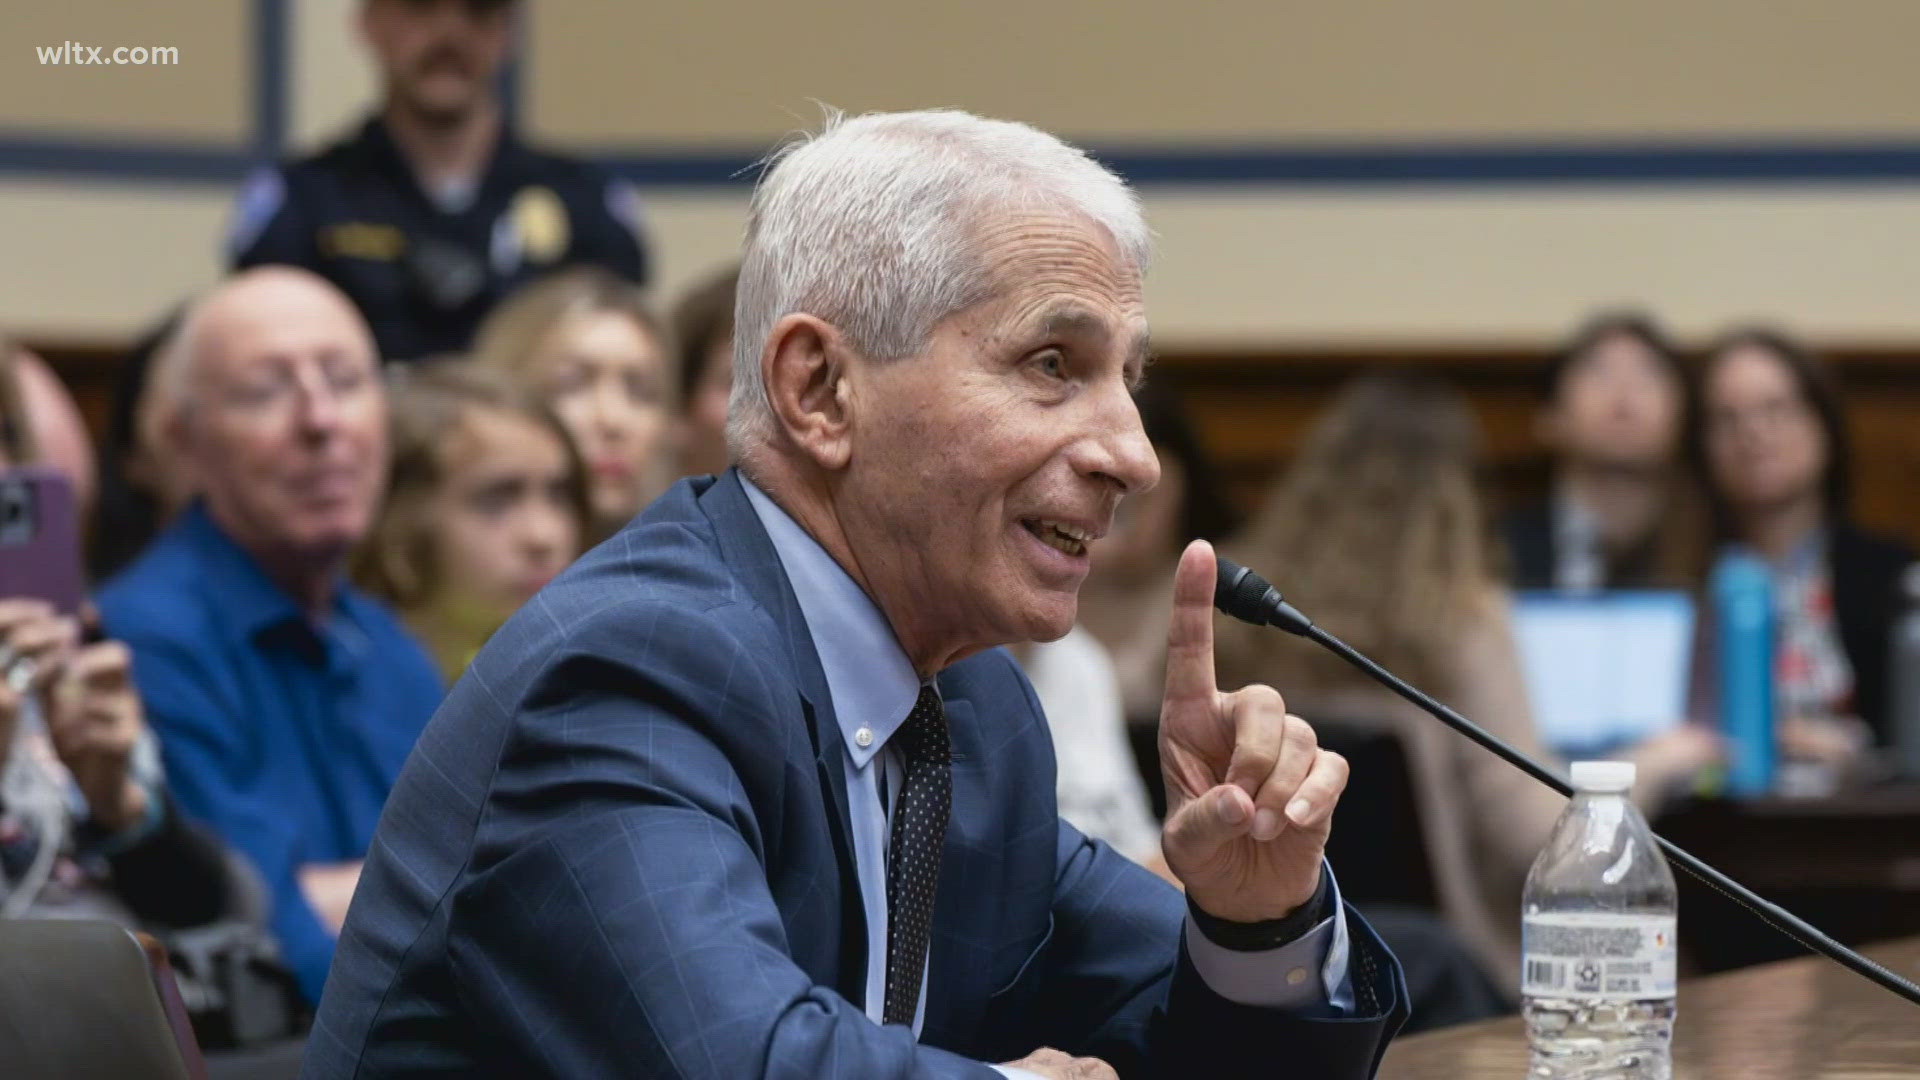 Dr. Anthony Fauci testified on Monday before a Republican-led House panel investigating the origins of COVID-19 and the government's pandemic response.